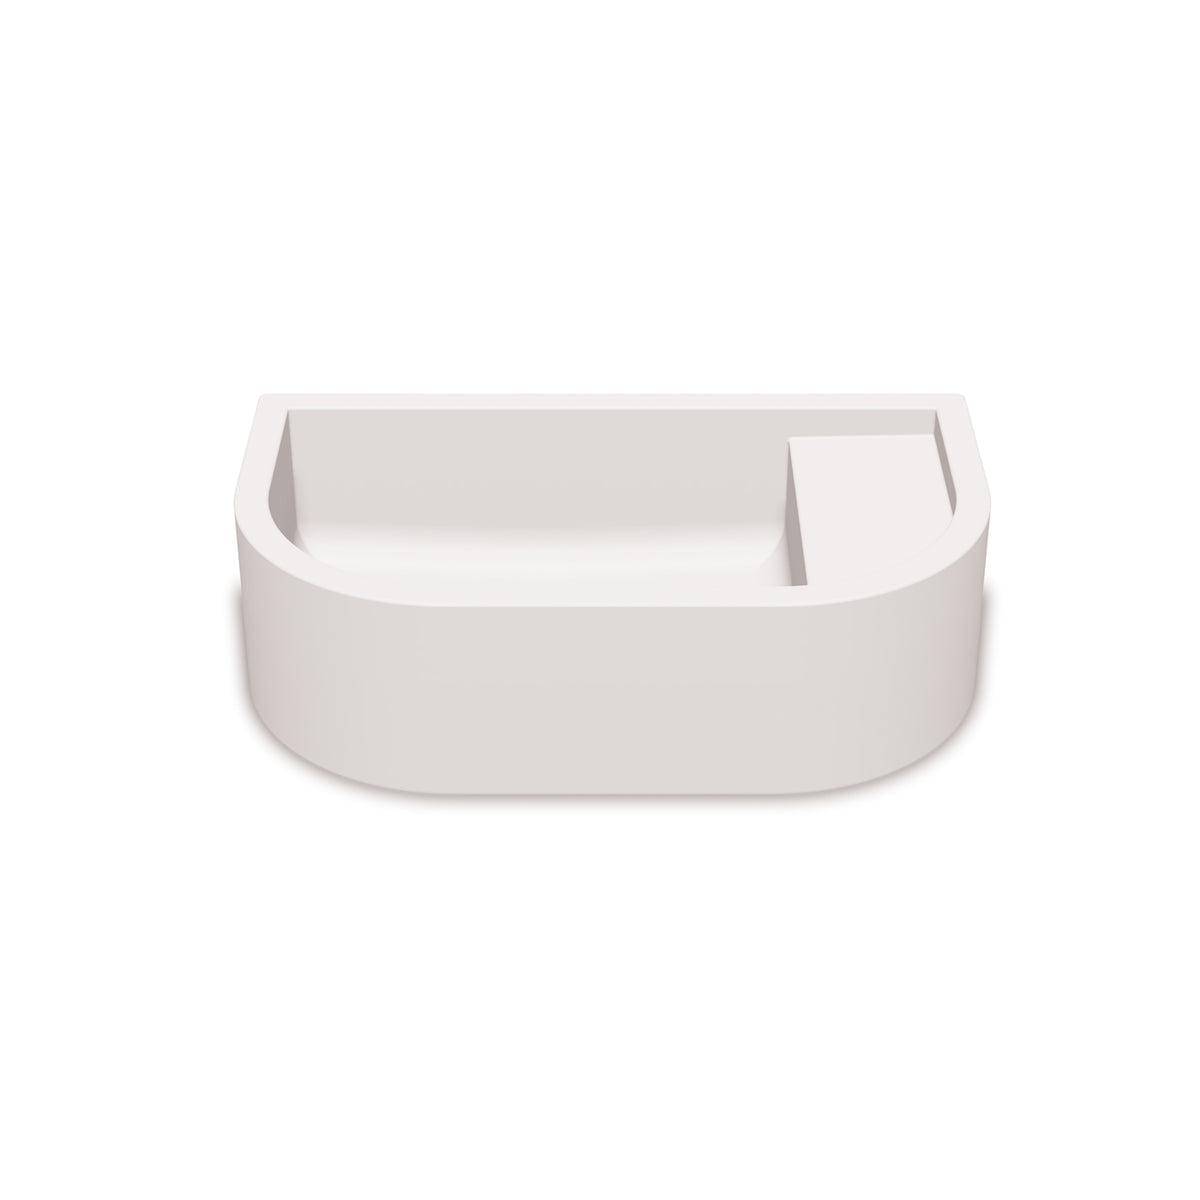 Loop 01 Basin - Overflow - Surface Mount (Ivory,No Tap Hole,Brass)